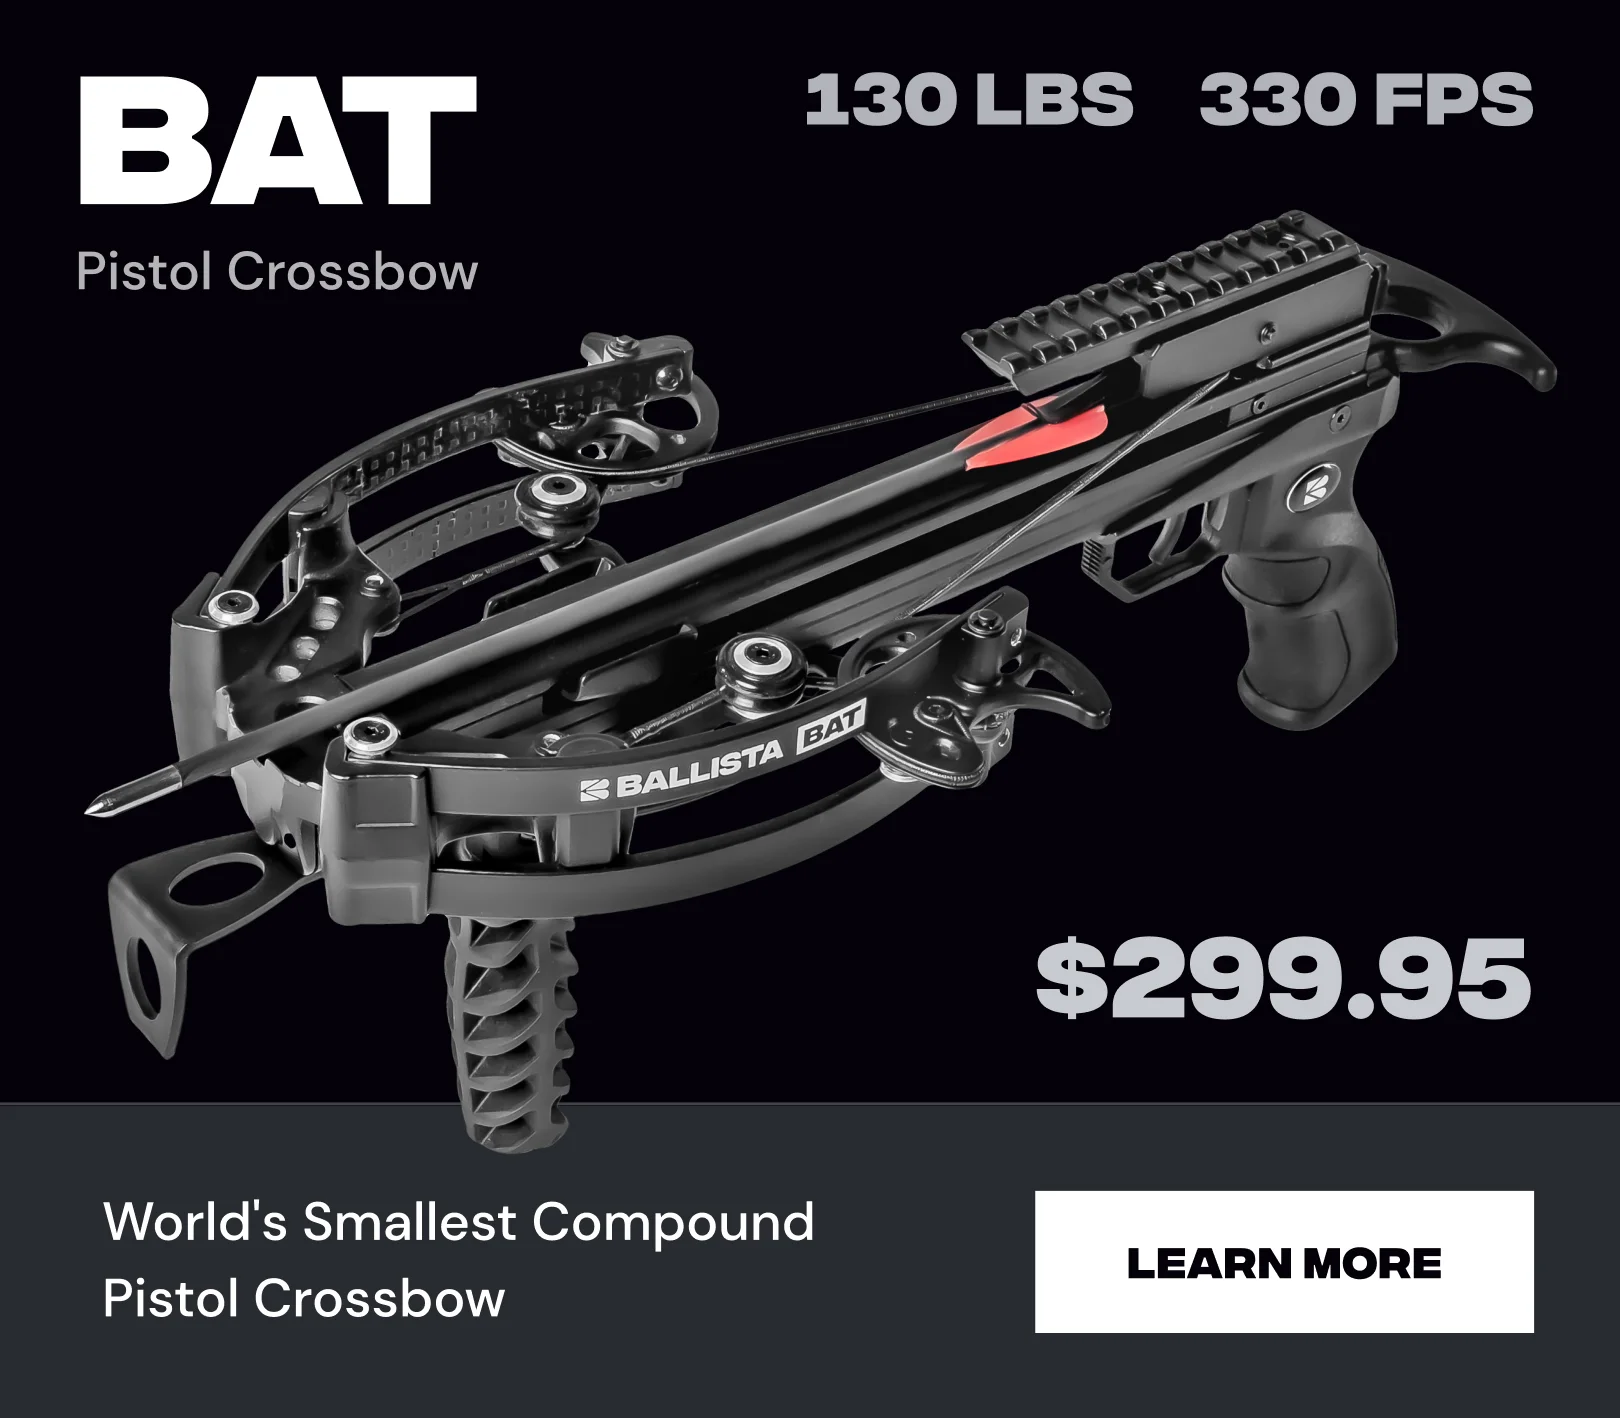 The Best Crossbow for Bowfishing in 2023: Meet the Bat Reverse